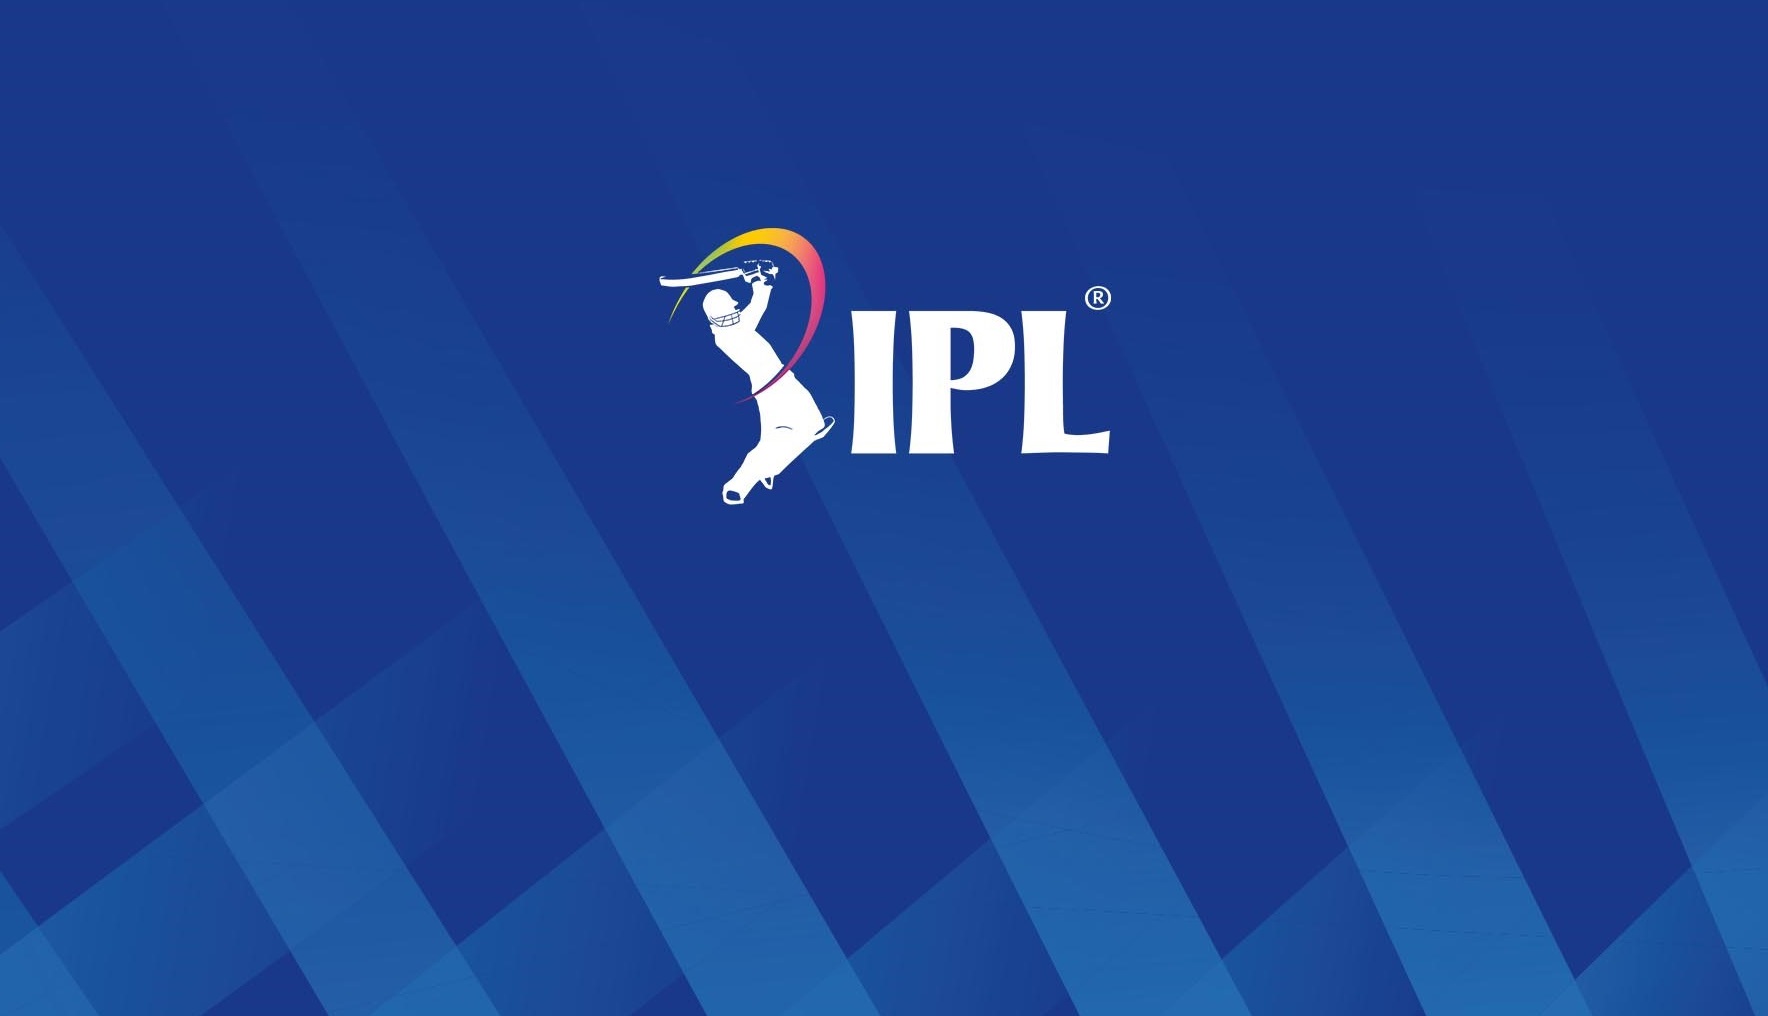 IPL 2021: Setbck for IPL, England cricketers set to miss IPL playoffs in uae